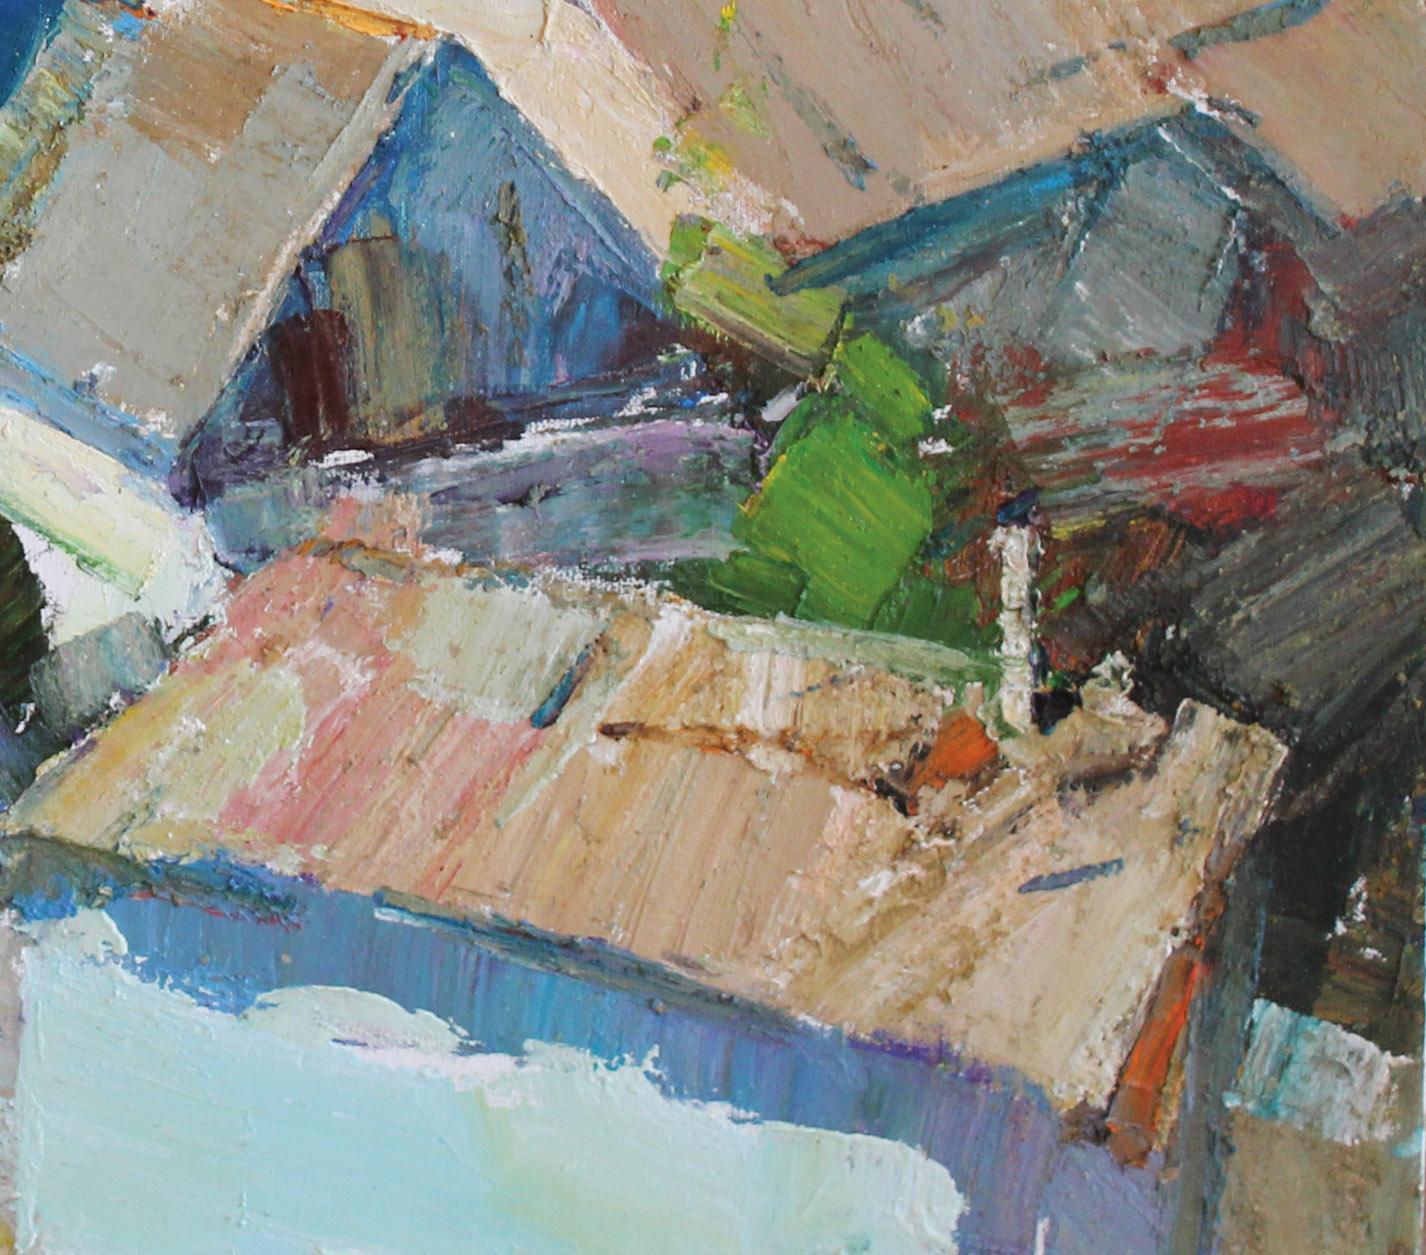 Fishermens' Village - Abstract Impressionist Painting by Andrey Inozemtsev